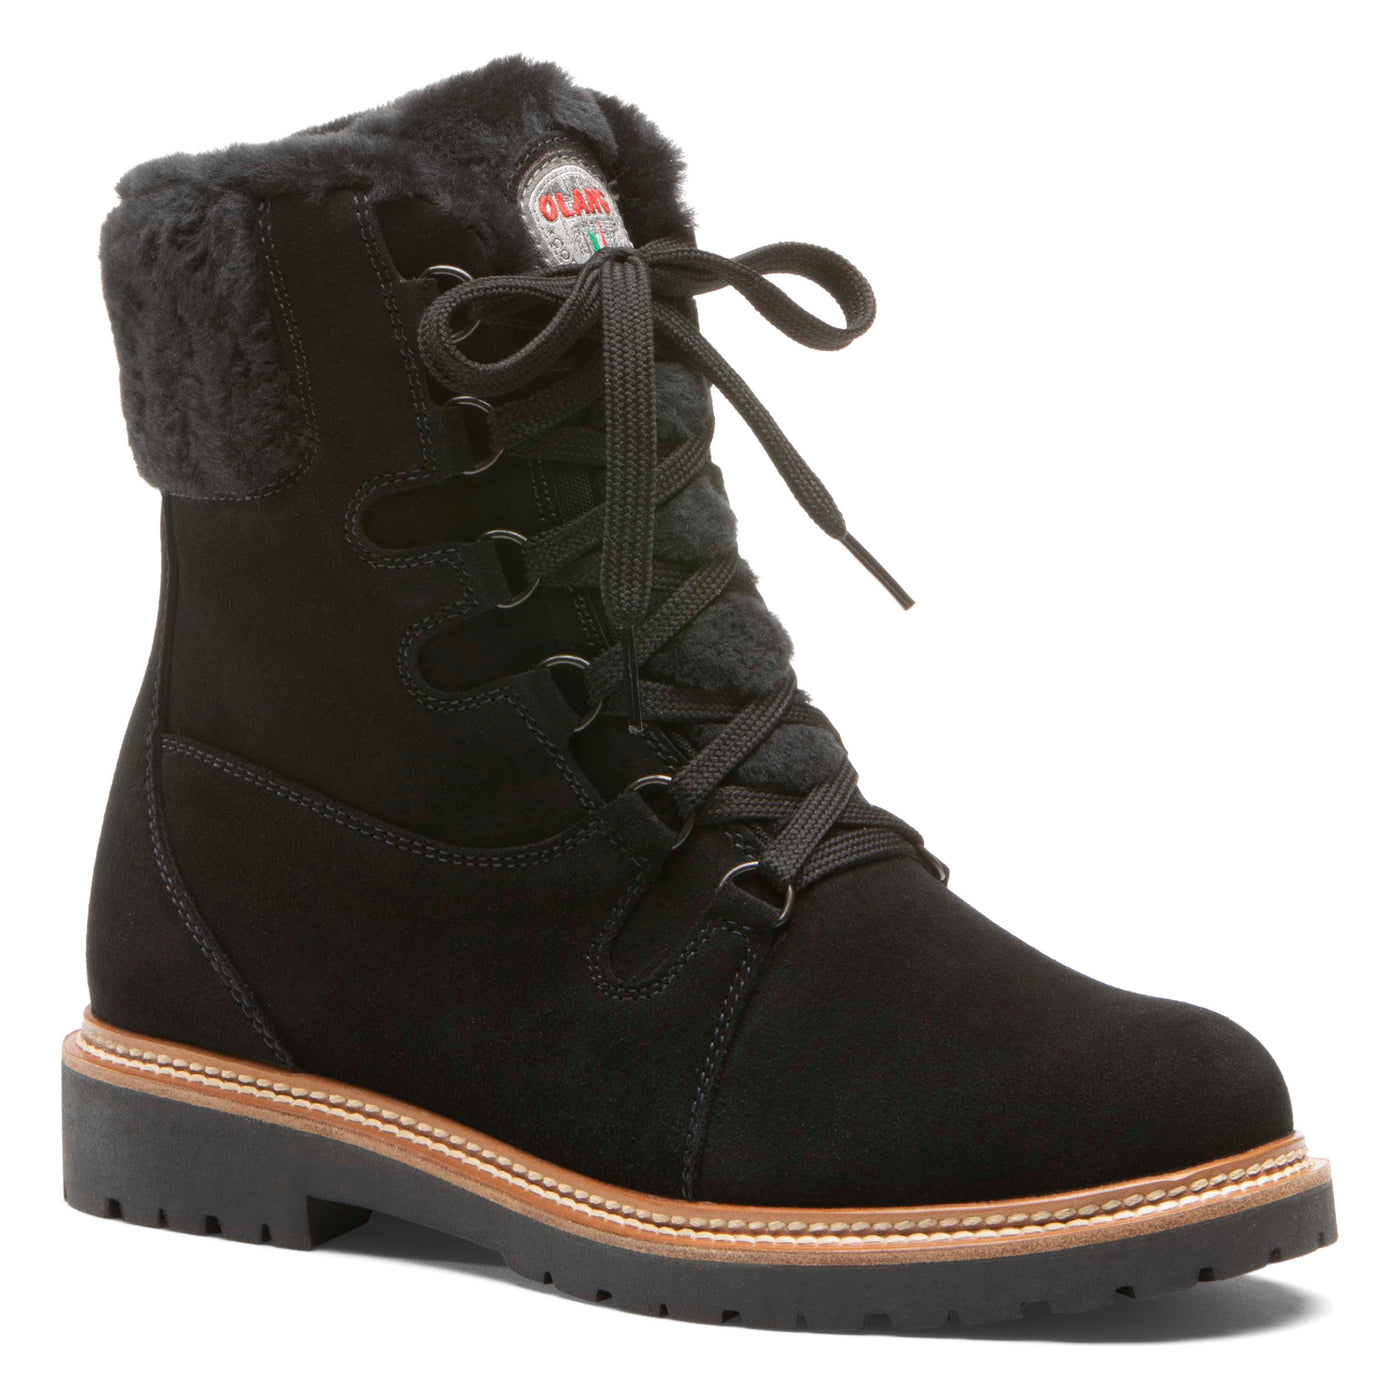 OLANG Meribel Winter Boots in Black Shearling and Hydro Suede